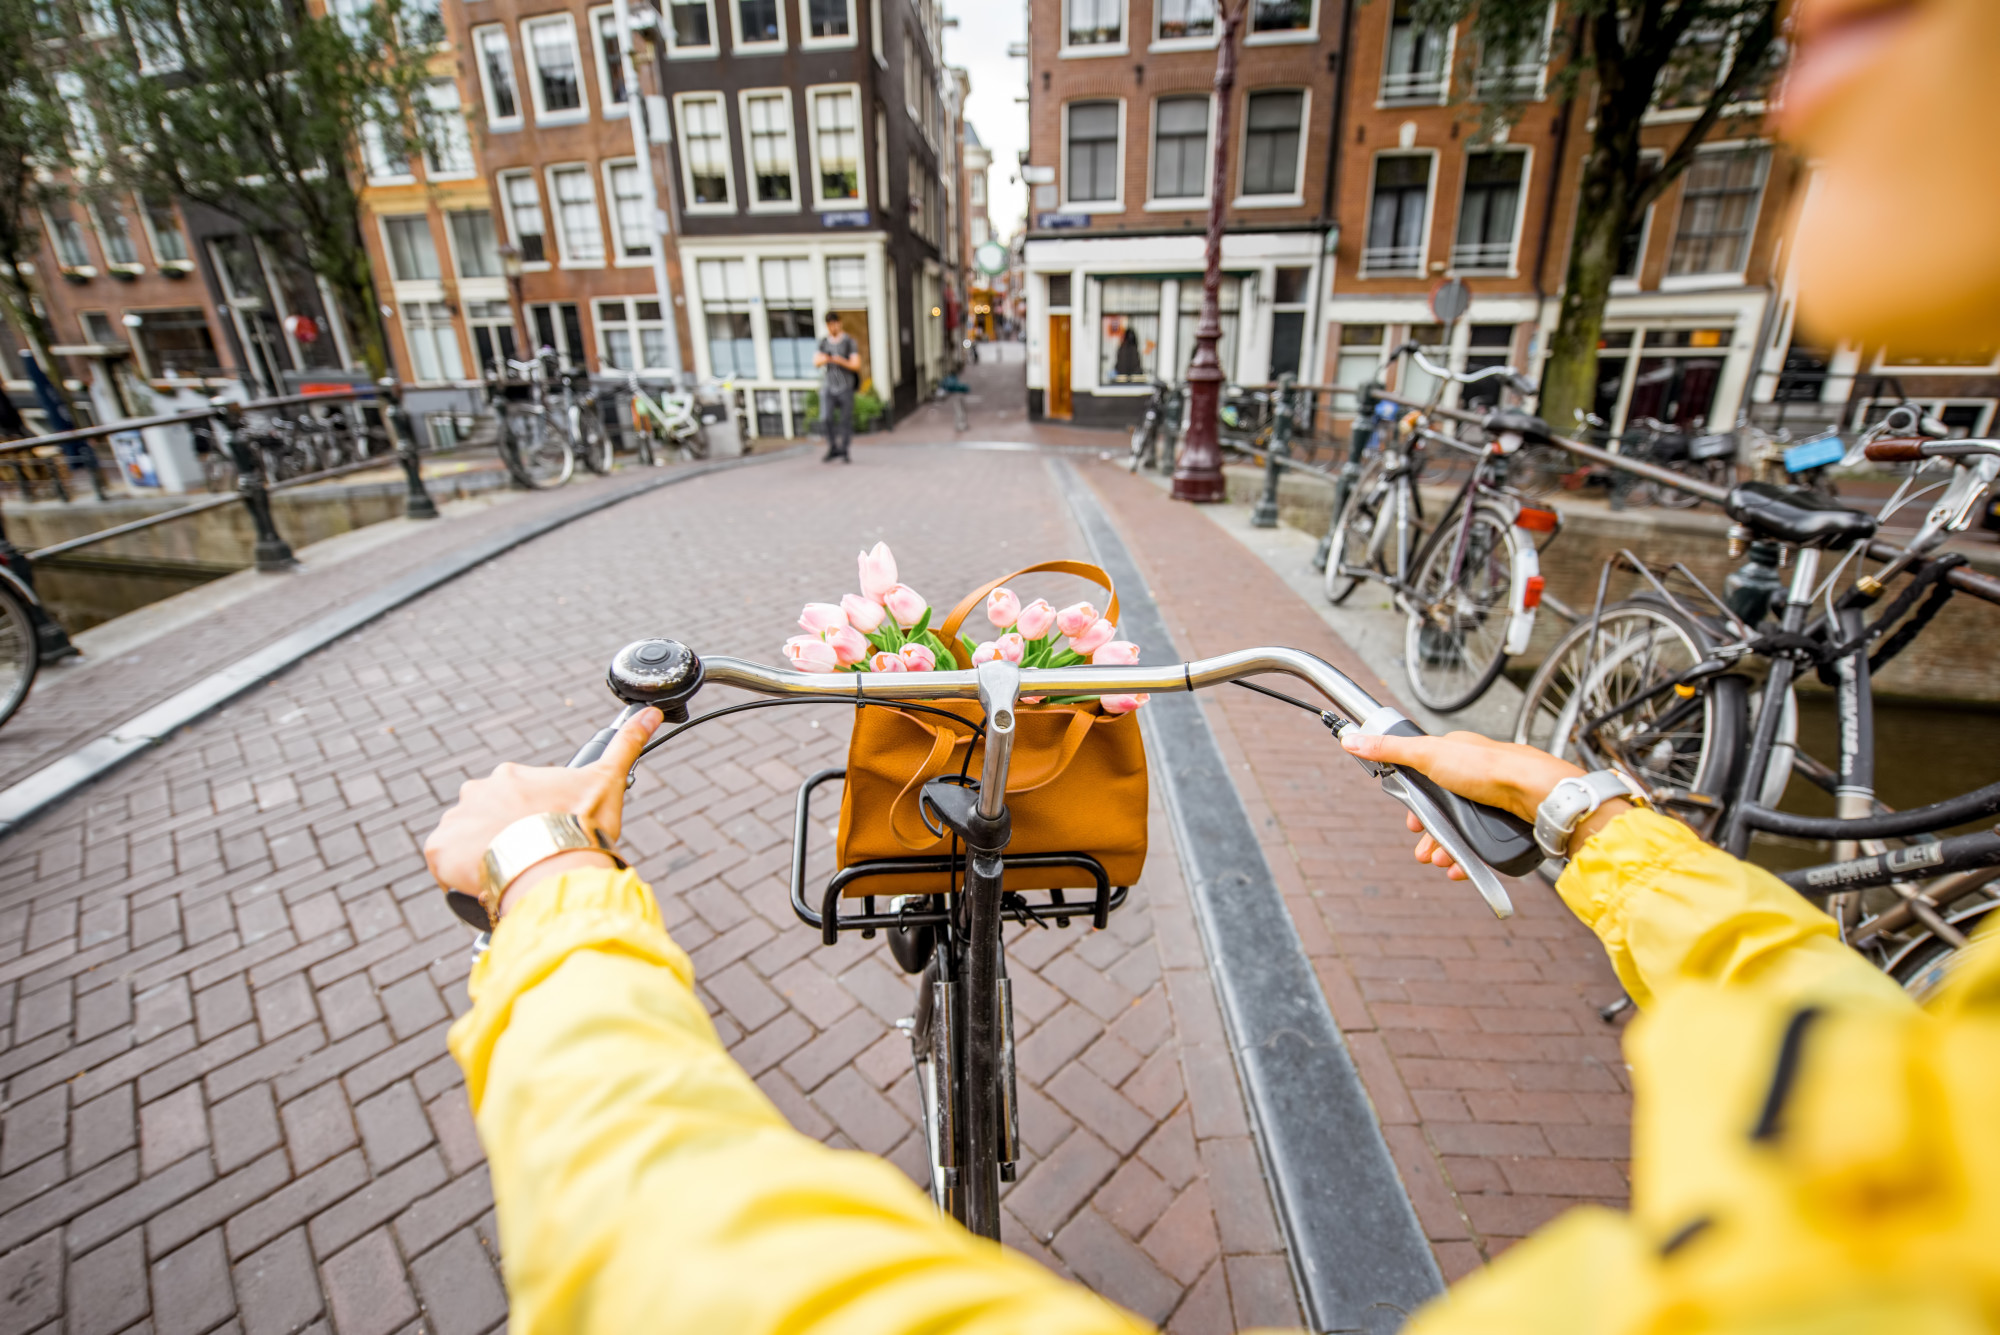 Riding a bicycle in Amsterdam